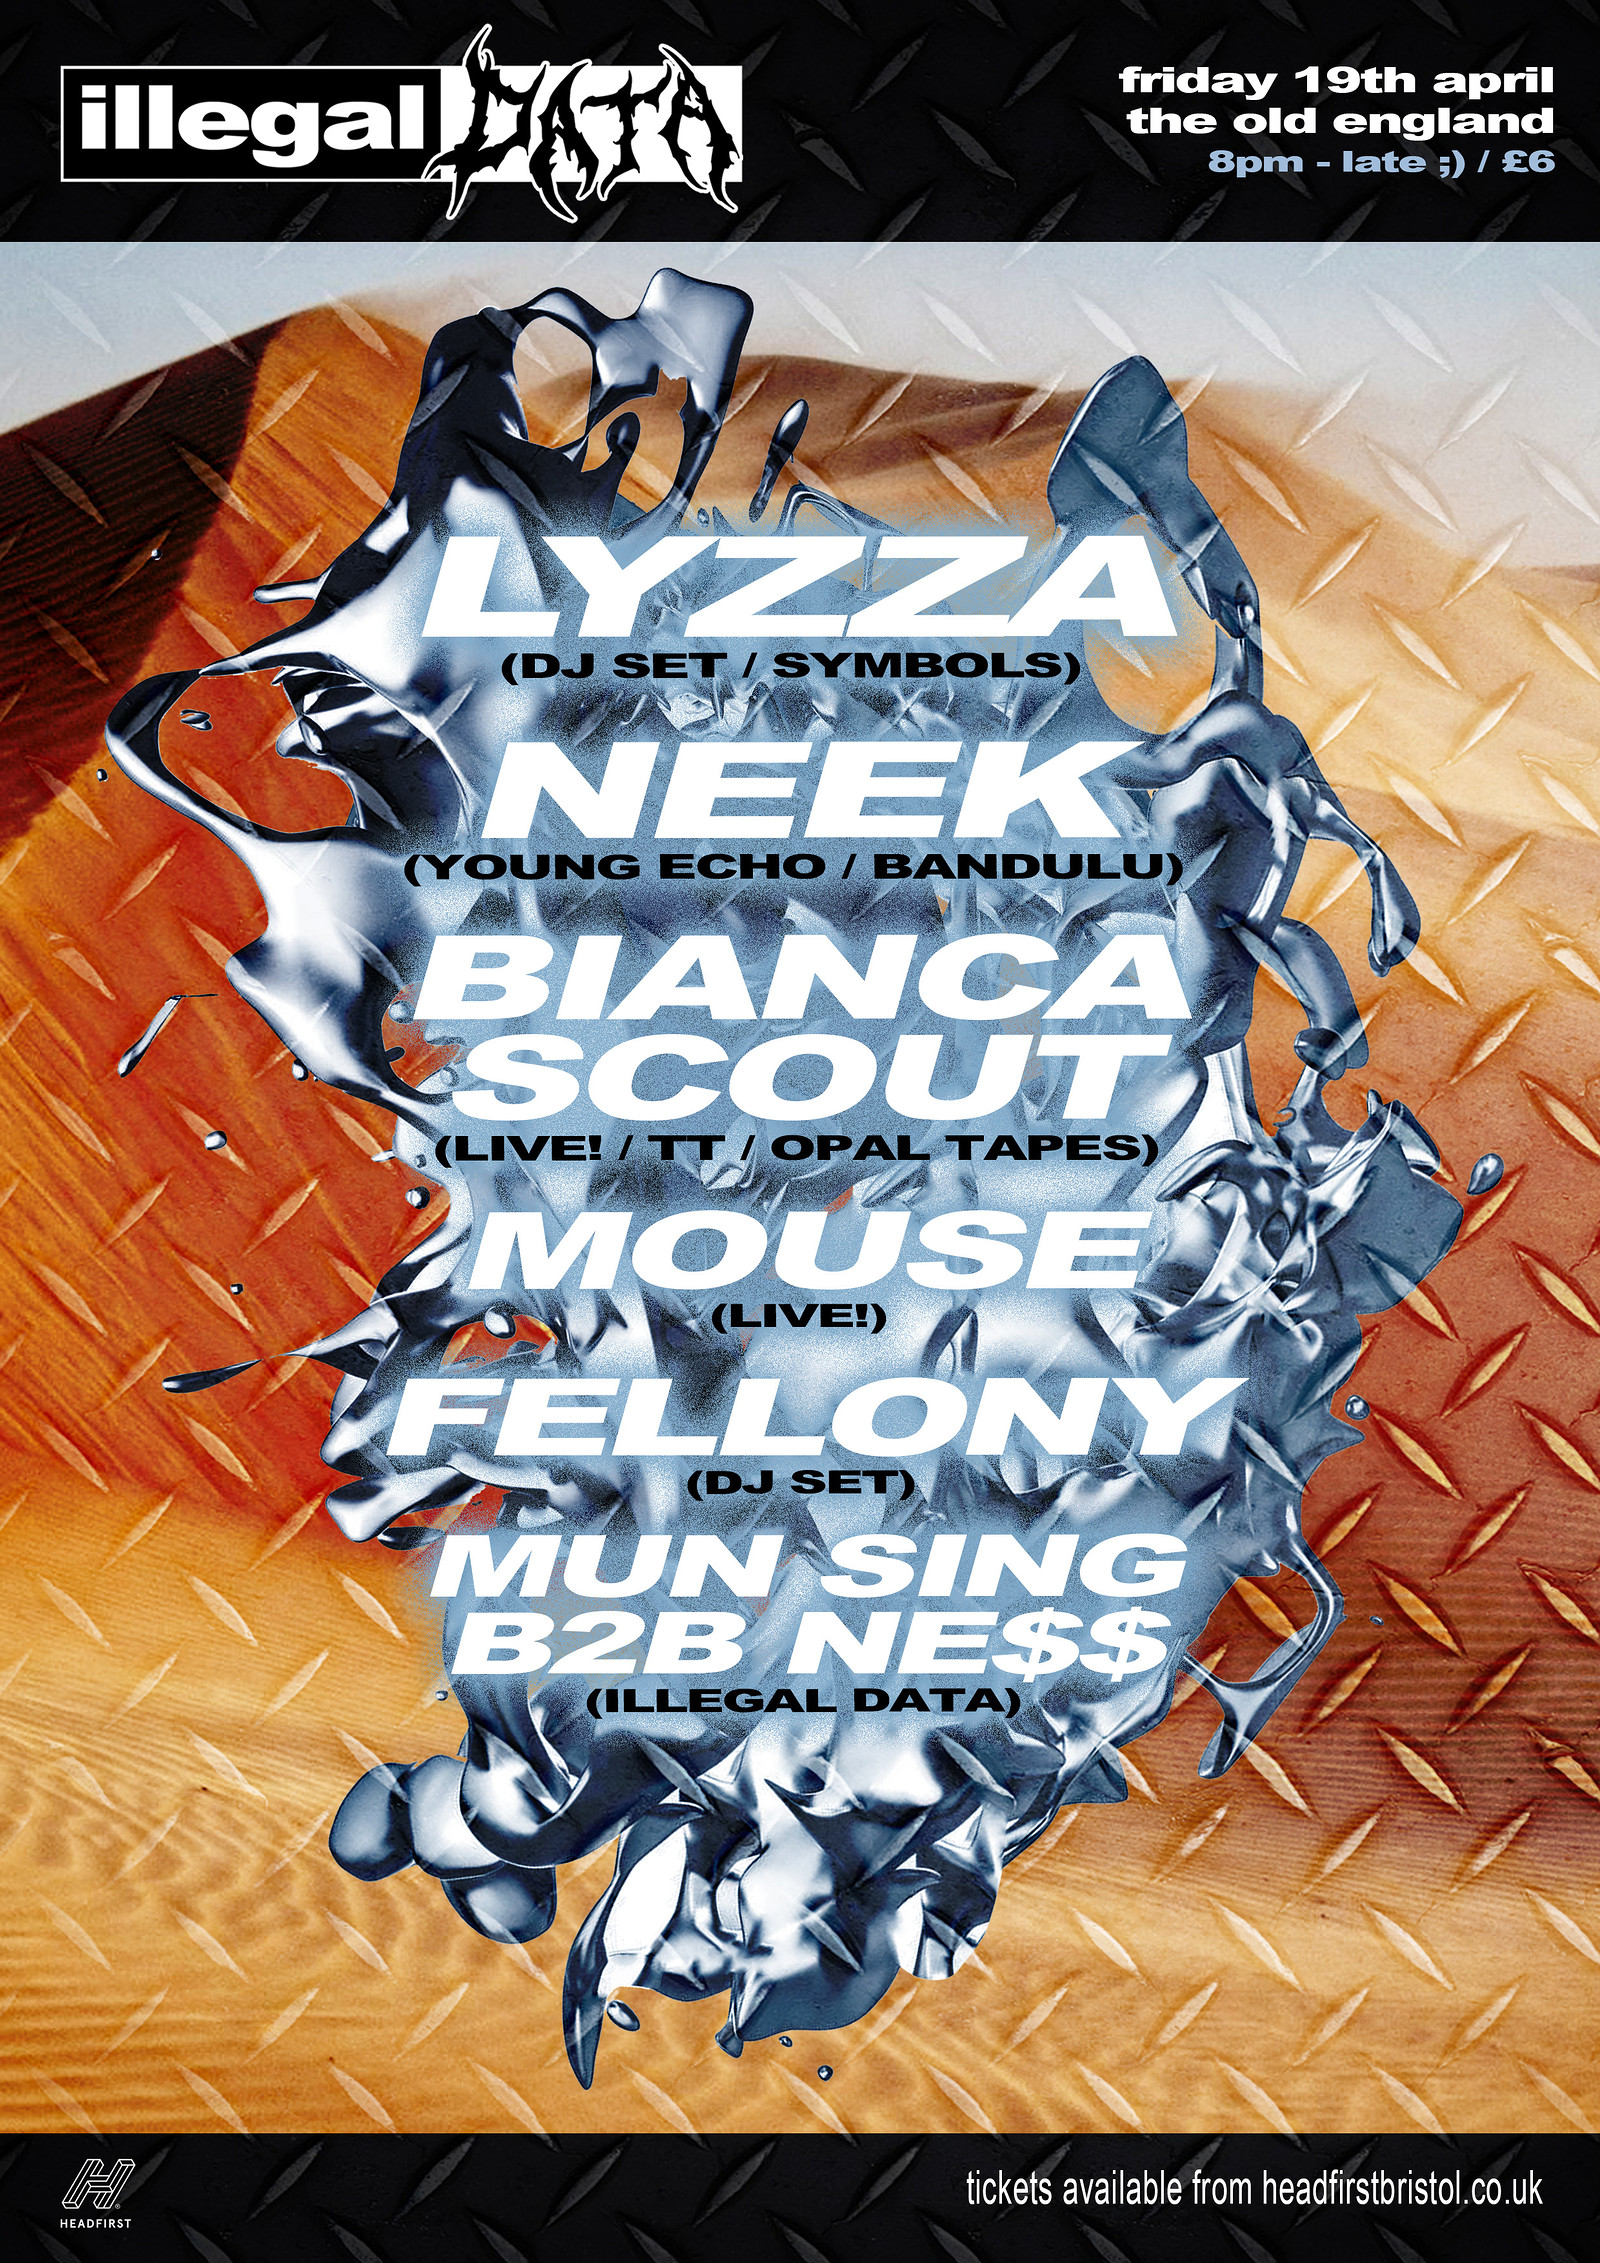 ILLEGAL DATA #6: LYZZA / Neek / Bianca Scout +++ at The Old England Pub